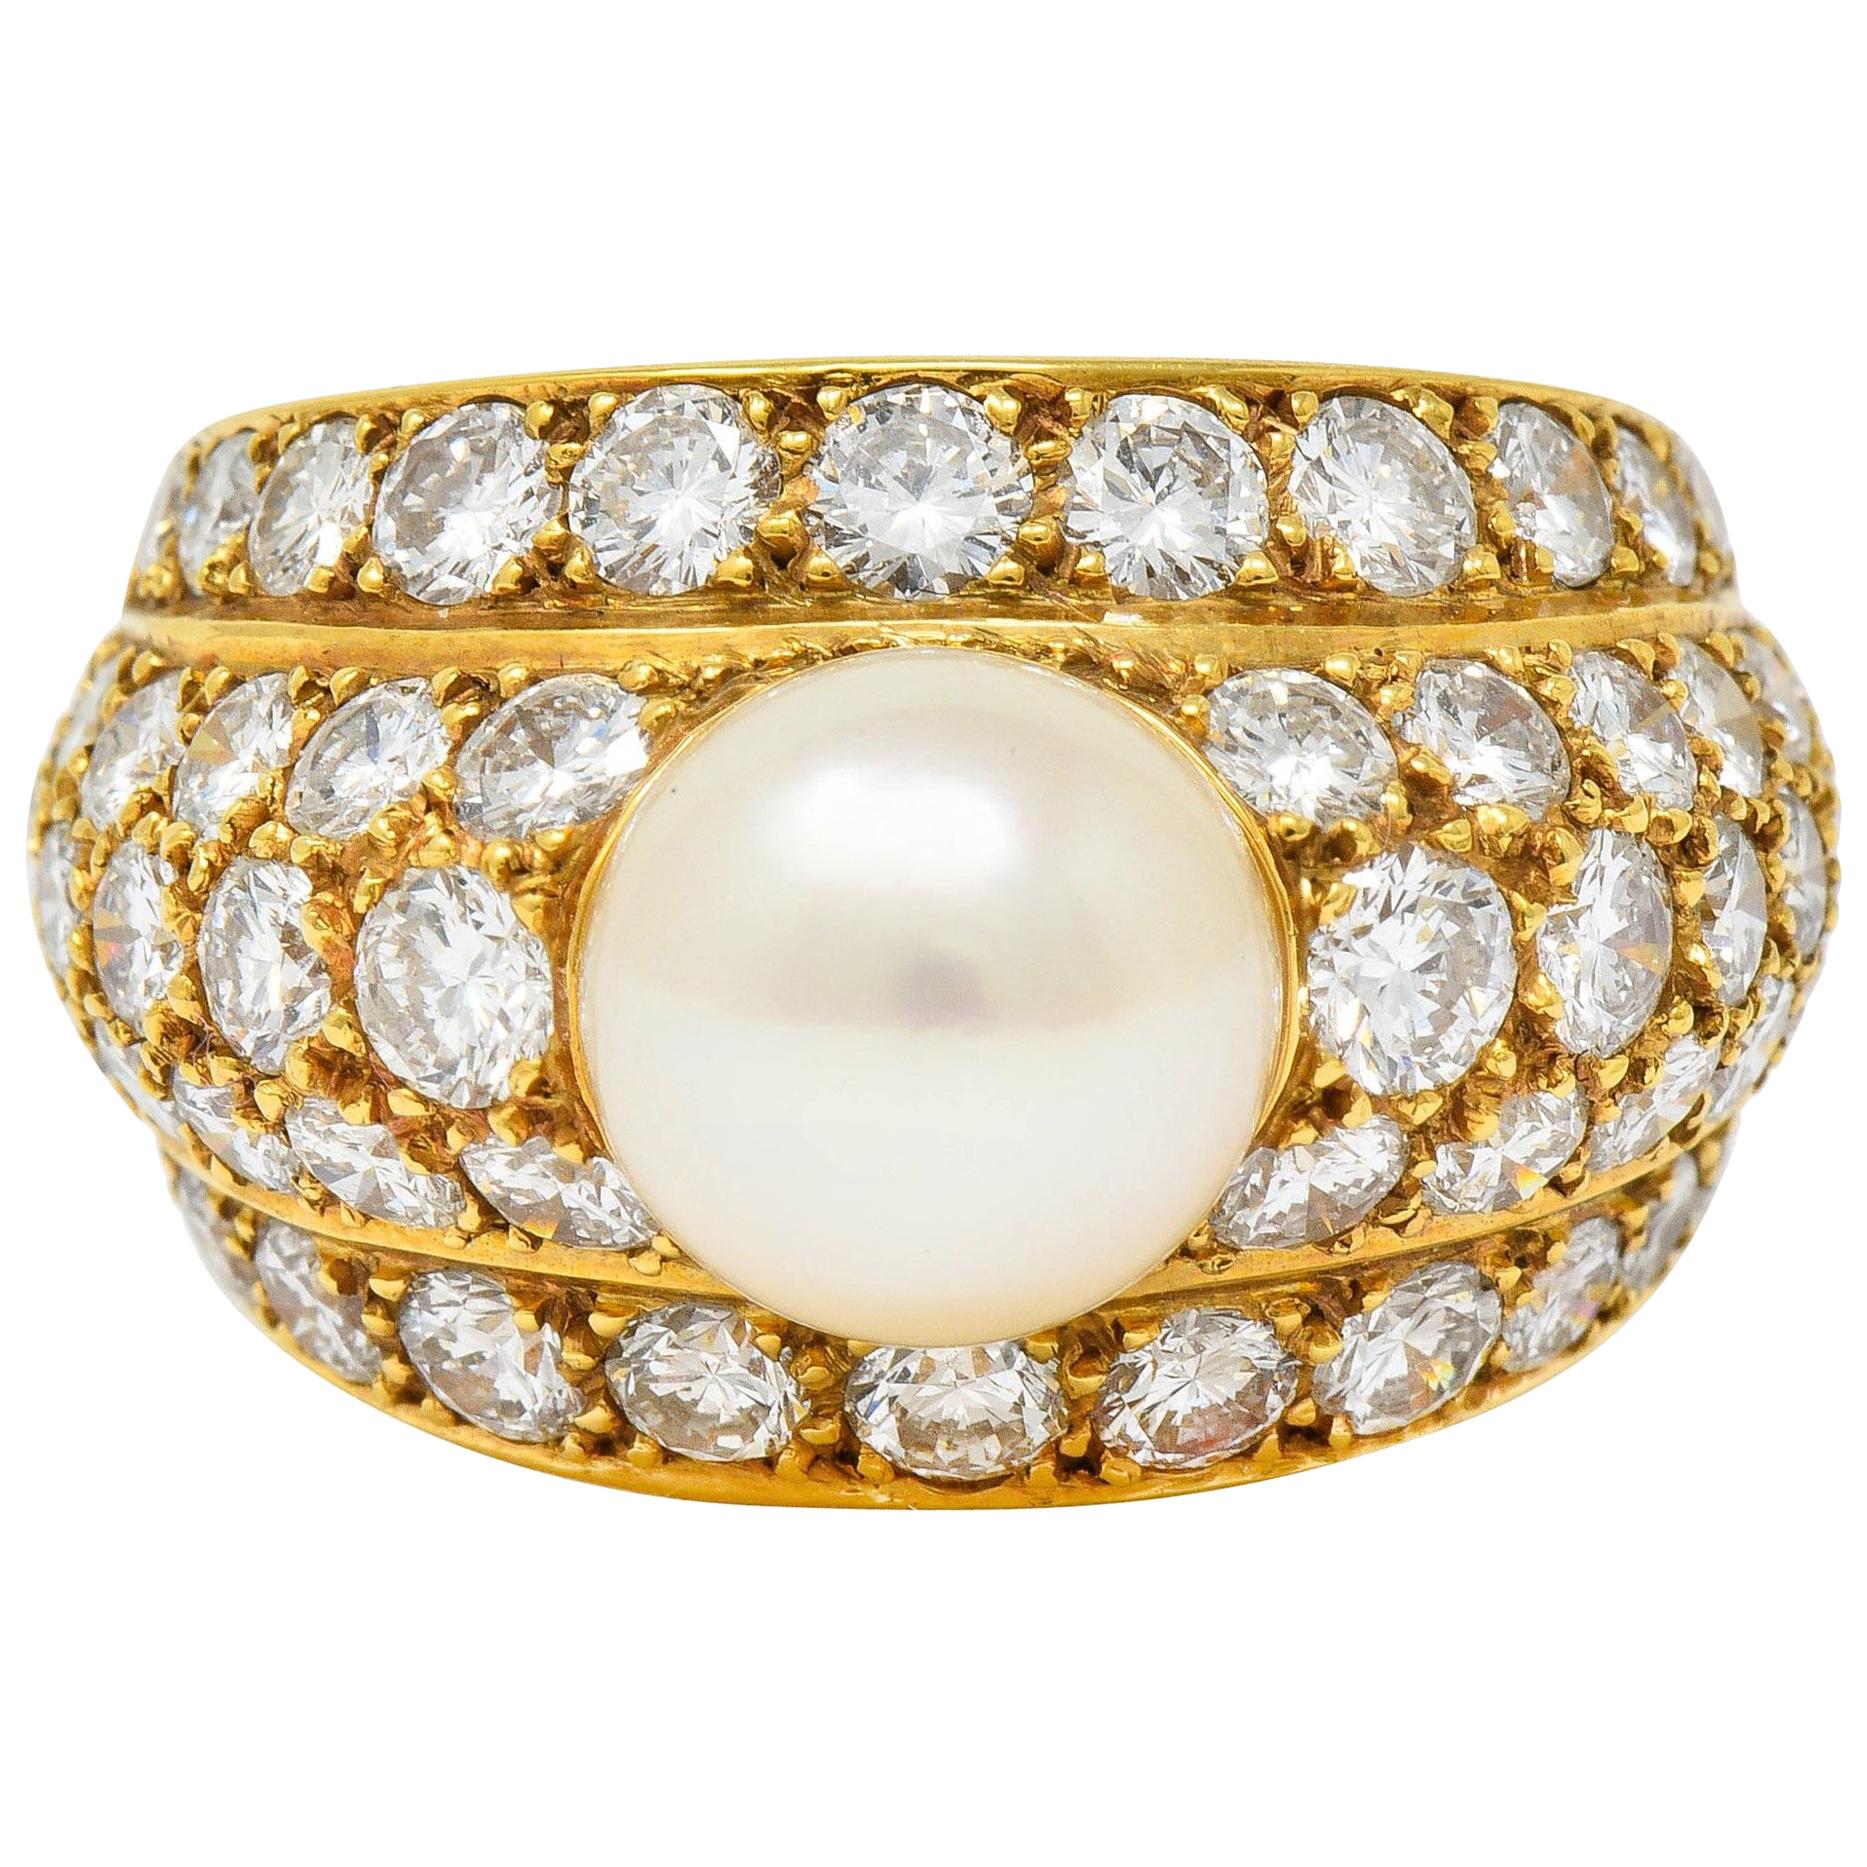 Cartier 2.80 Carat Pave Diamond Cultured Pearl French 18 Karat Gold Band Ring